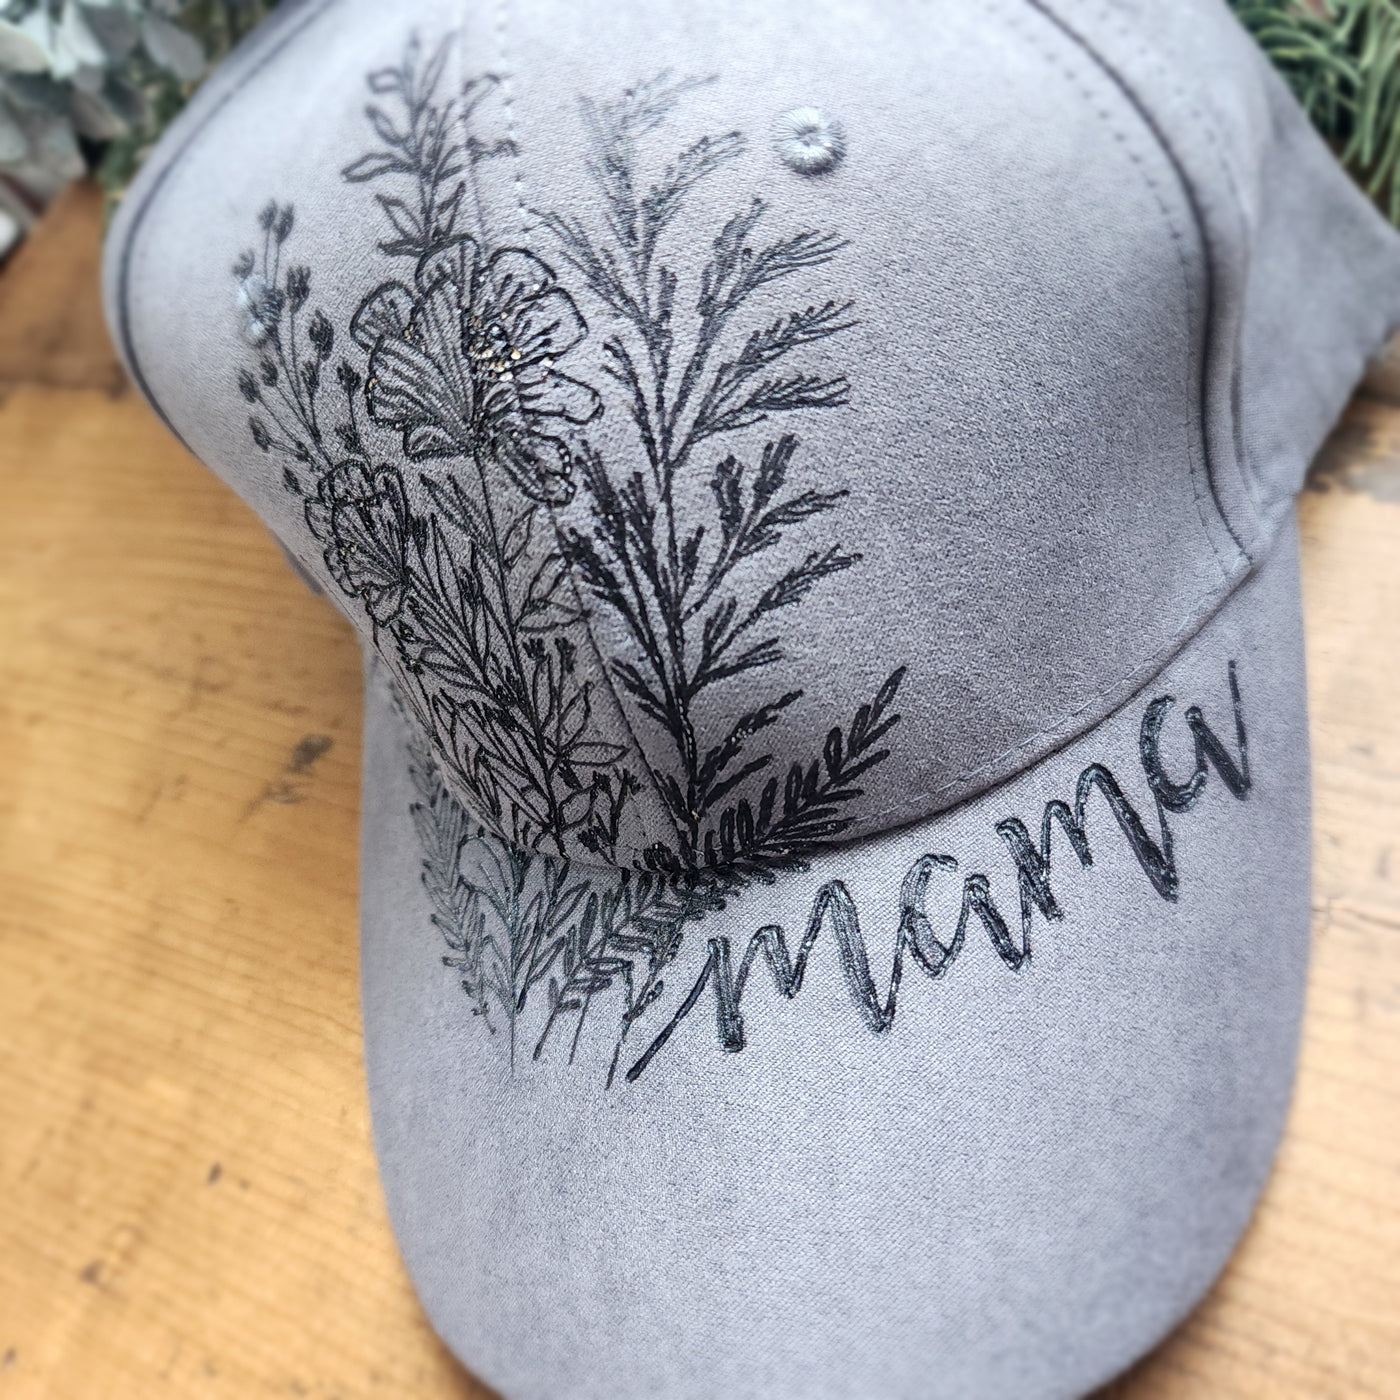 Mama Floral || Dark Gray Baseball Style Suede Hat || Freehand Burned